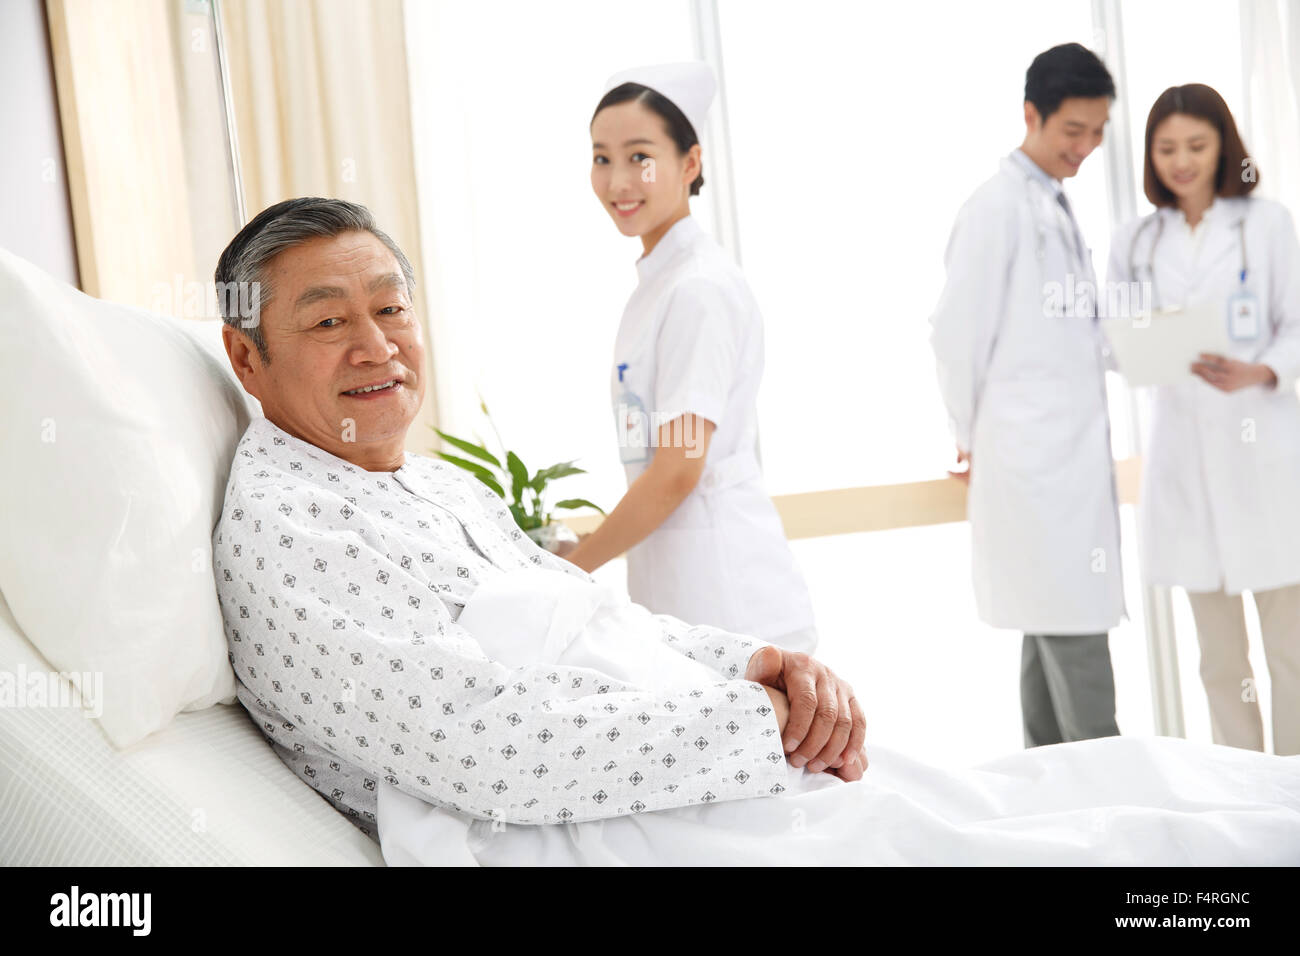 Medical workers and patients in the ward Stock Photo